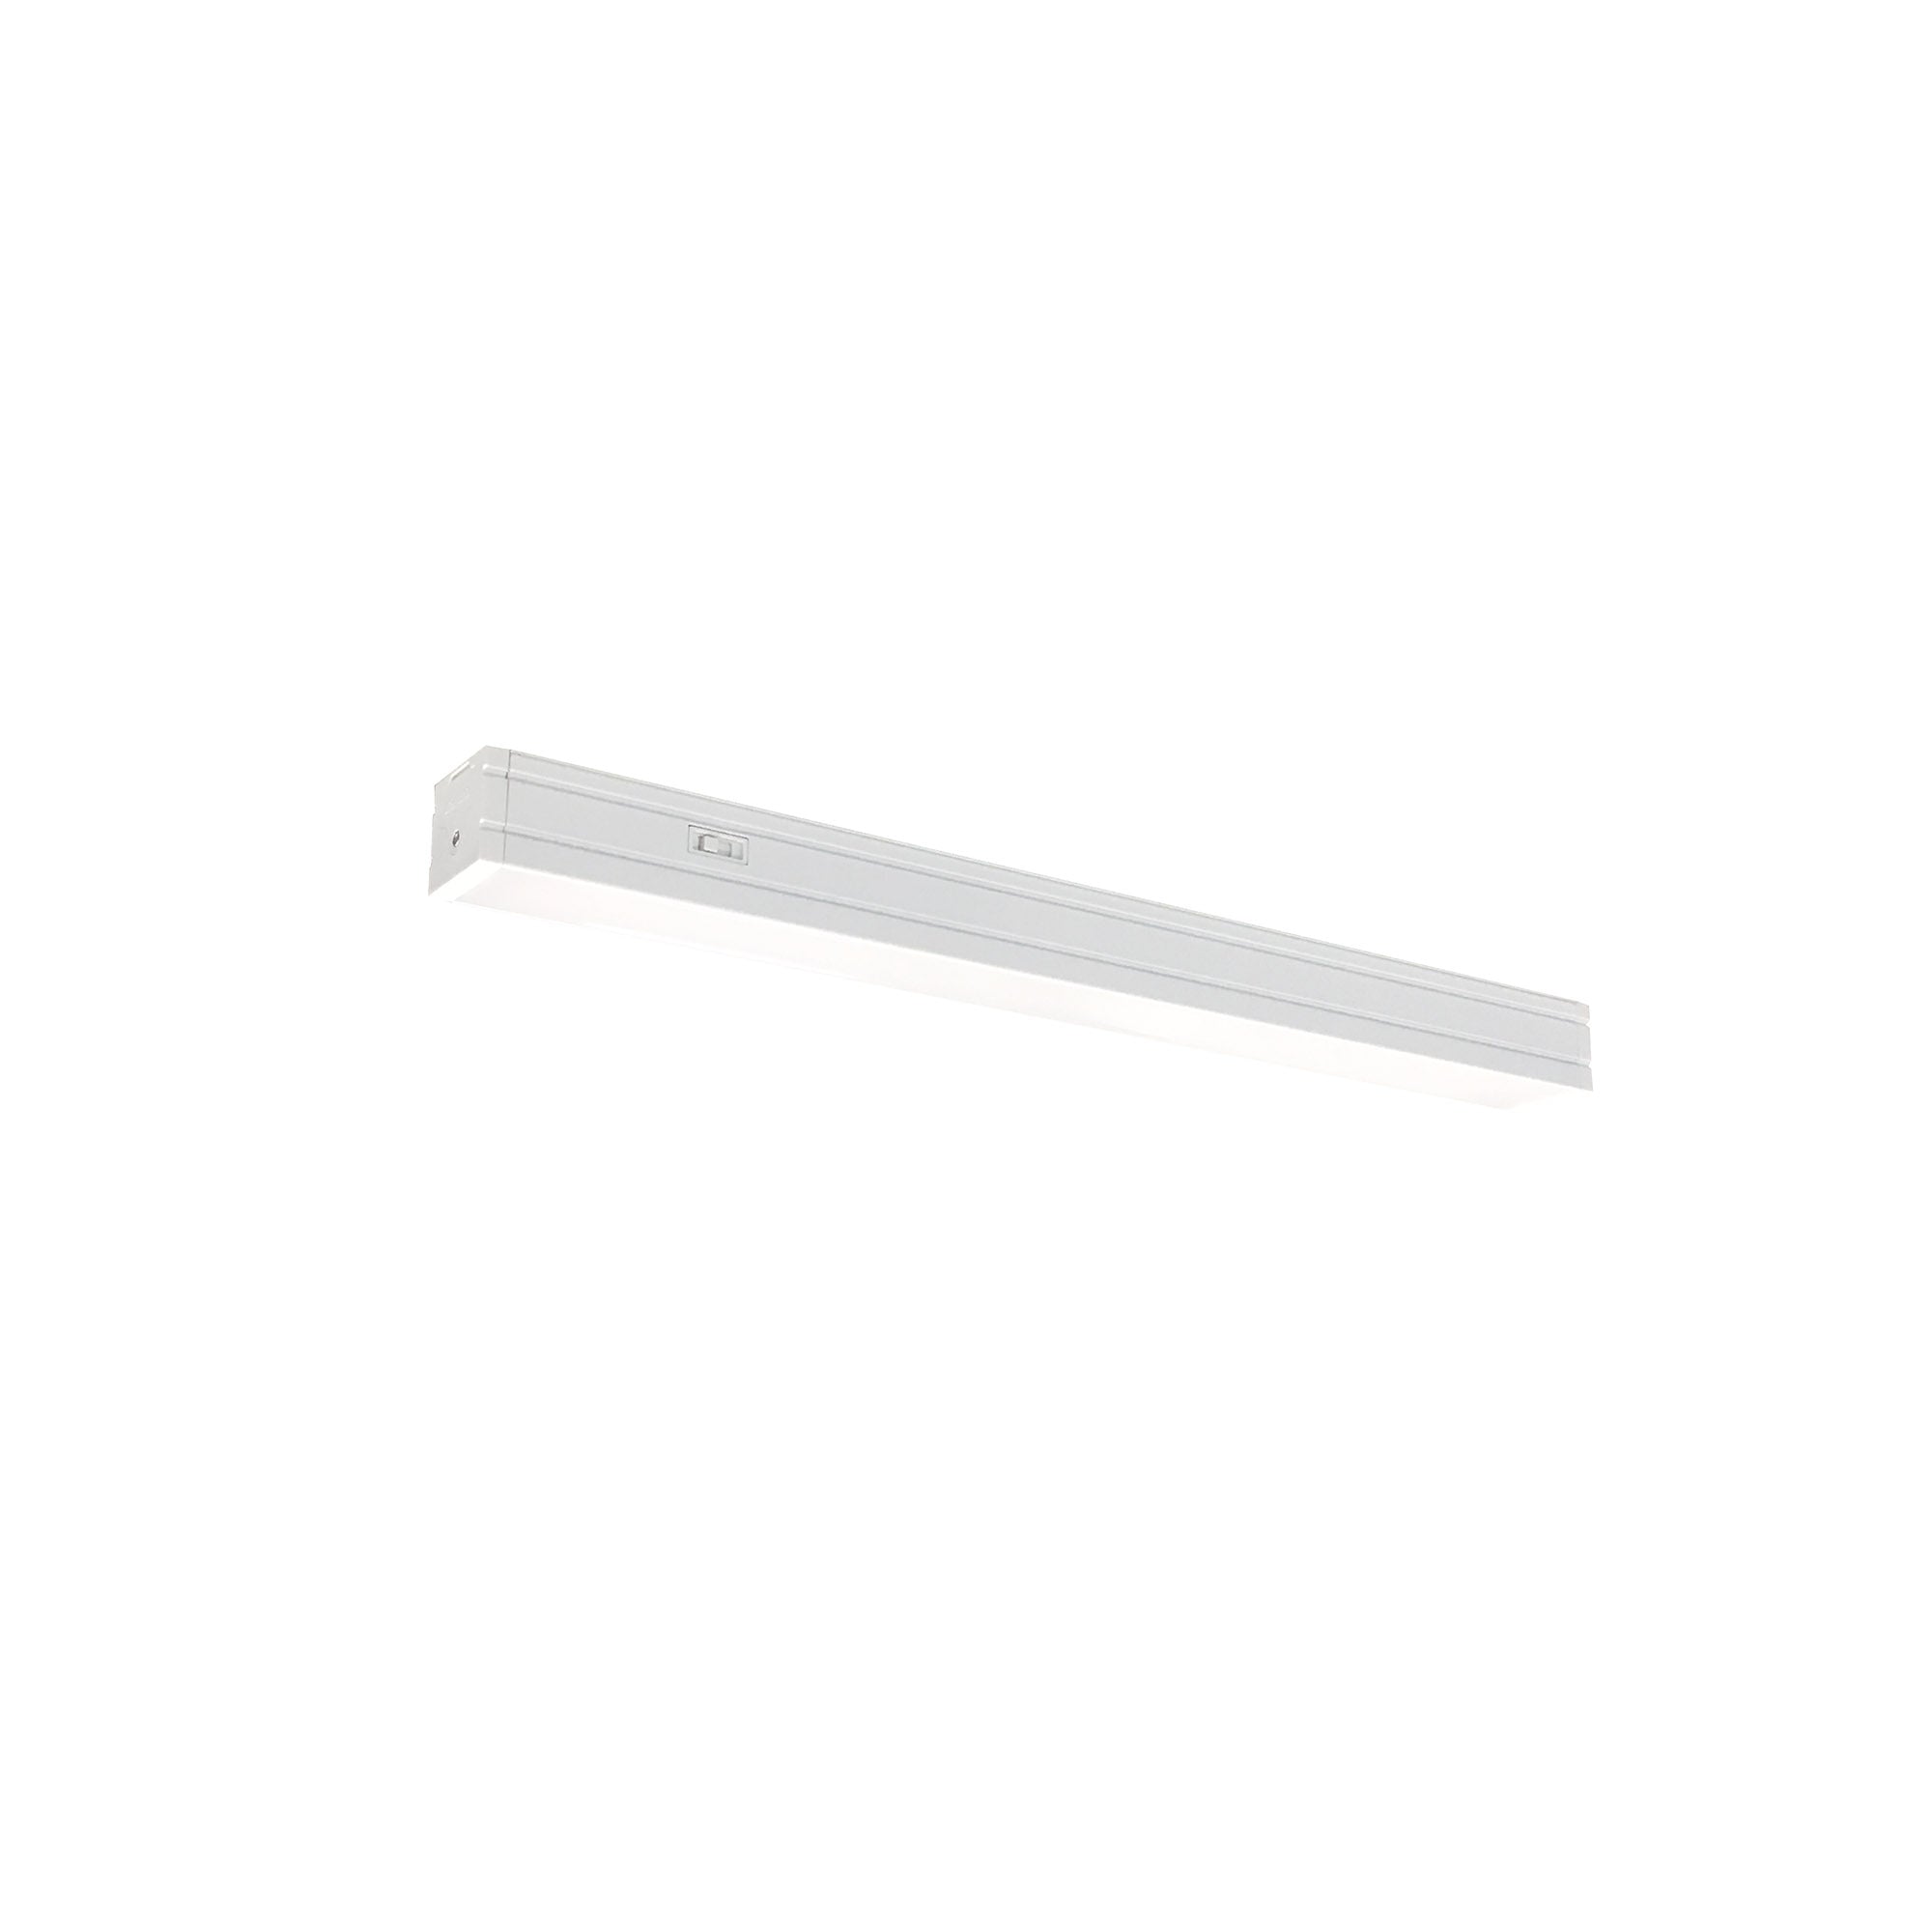 Nora Lighting NUDTW-9816/W - Accent / Undercabinet - 16 Inch Bravo FROST Tunable White LED Linear, 3000/3500/4000K, White